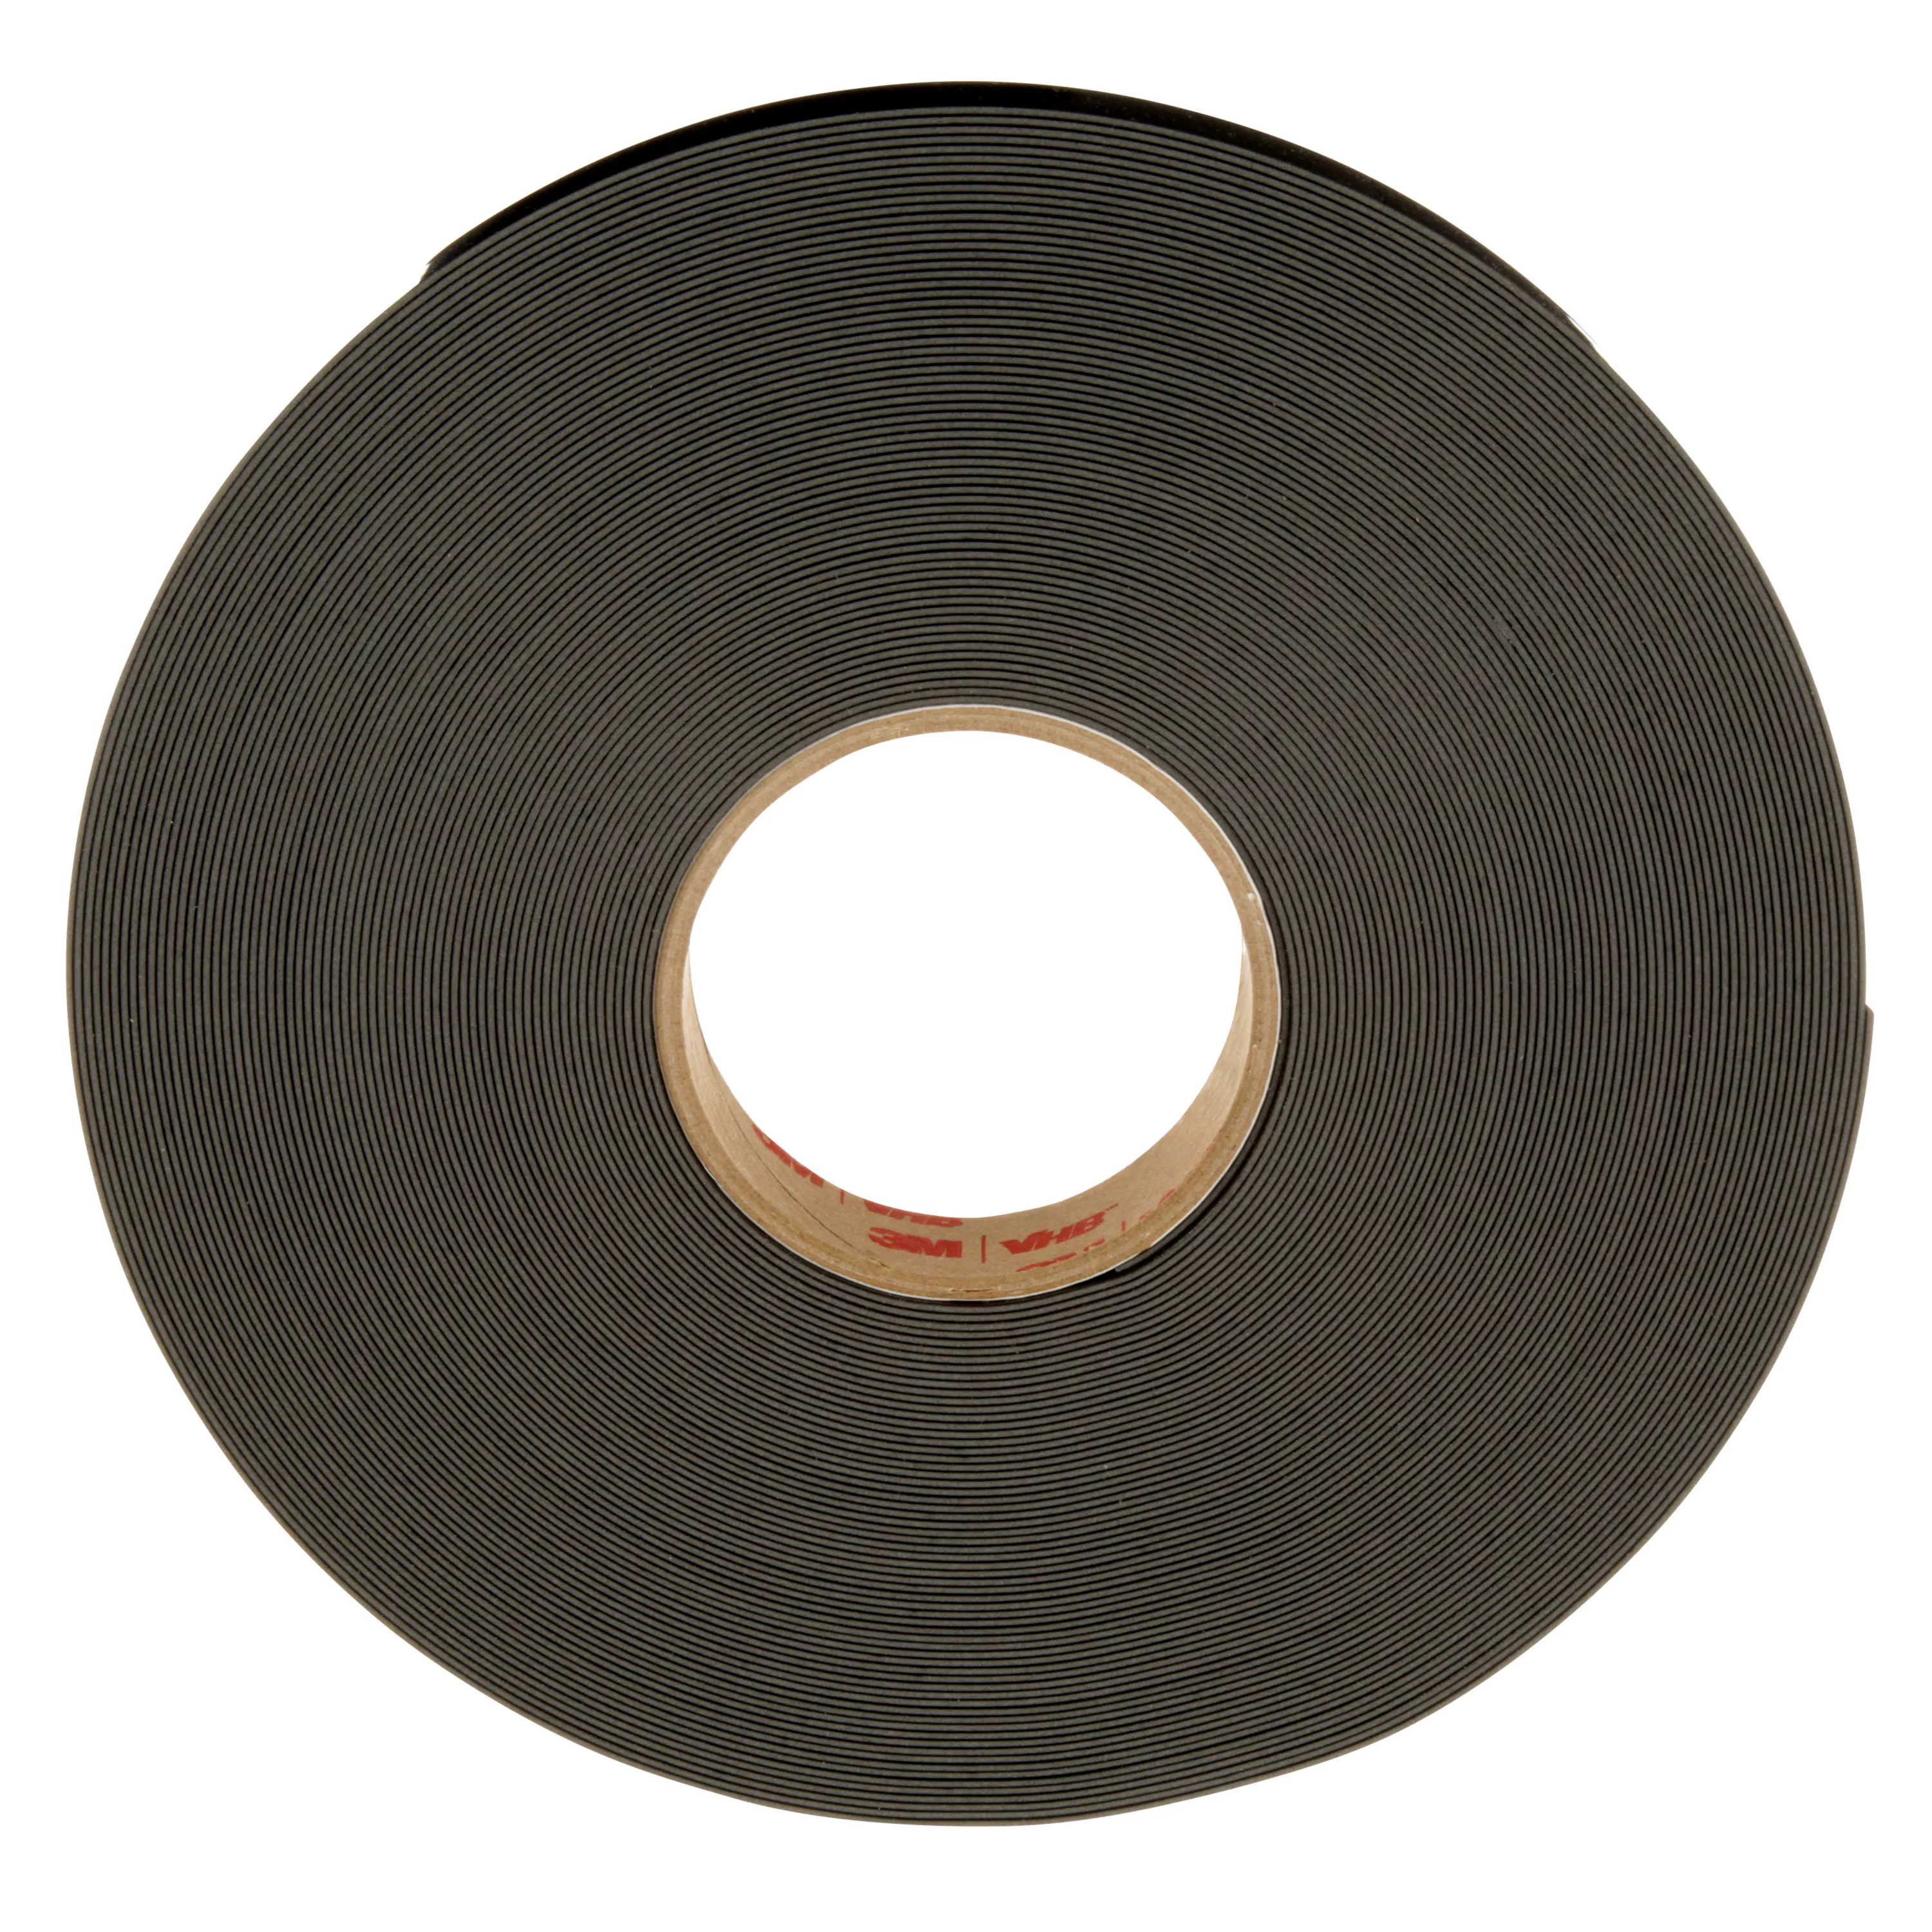 Product Number 4929 | 3M™ VHB™ Tape 4929